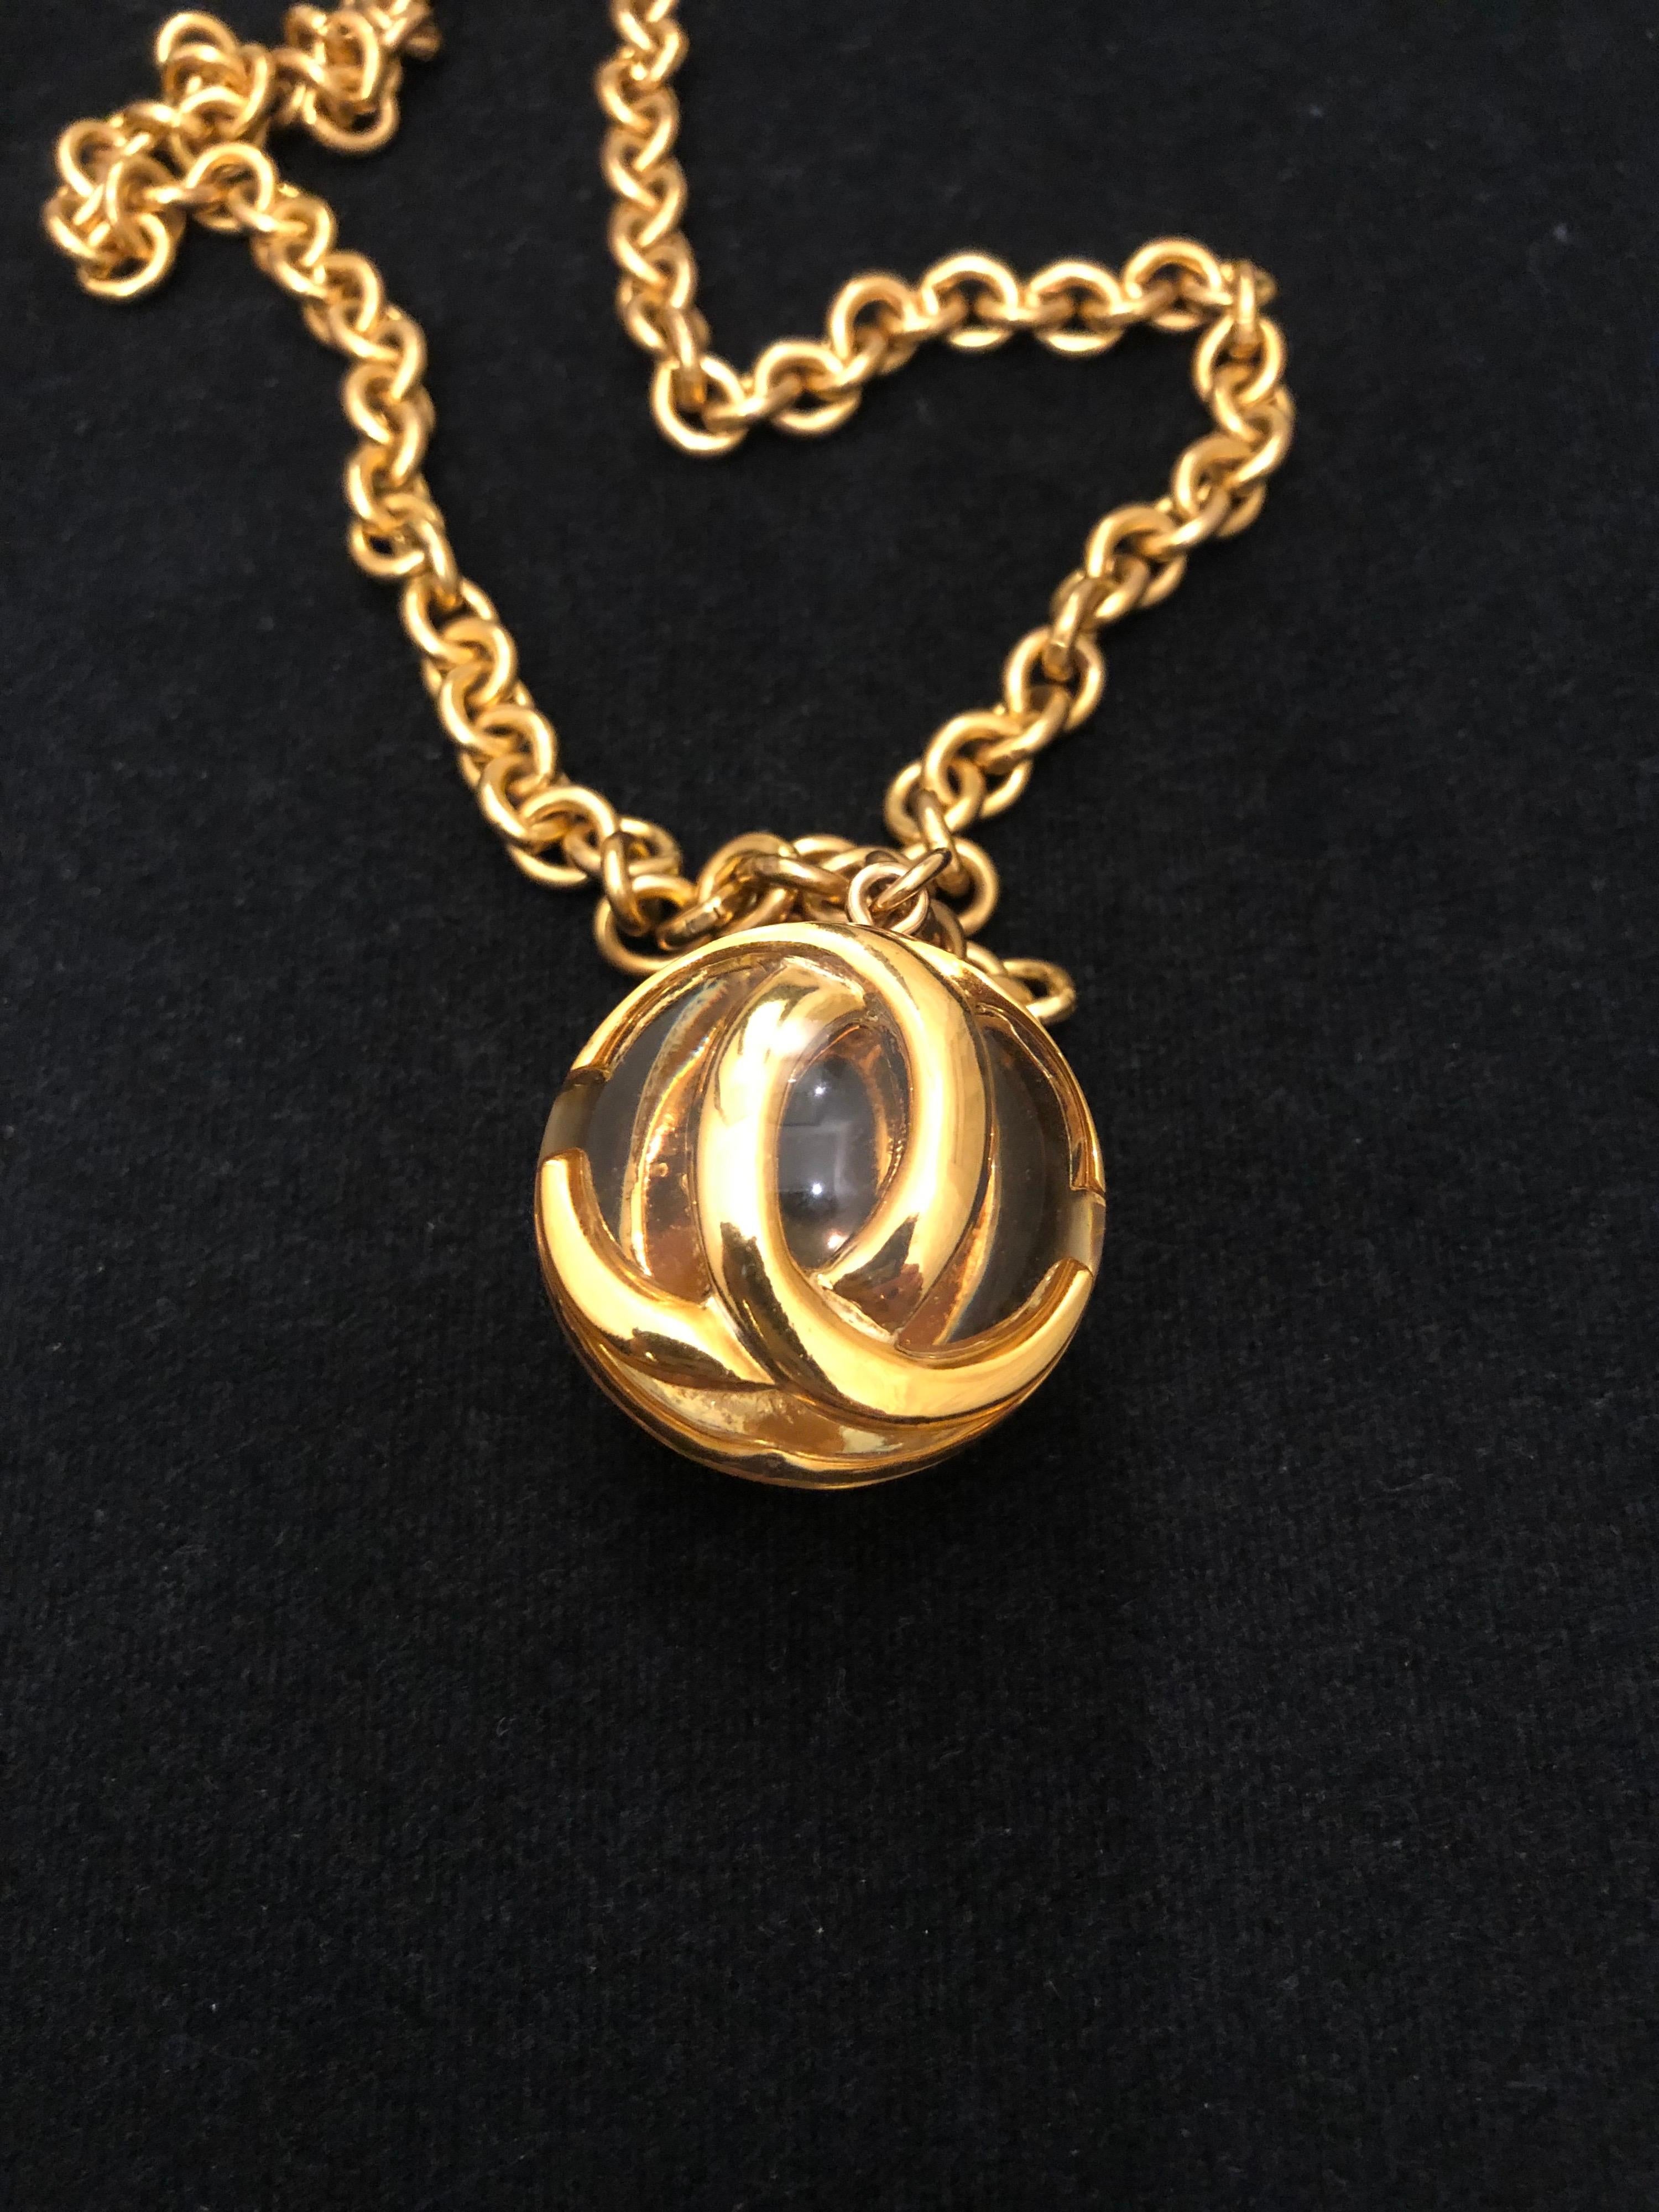 1980s Chanel gold toned long chain necklace featuring 3-dimensional CC charm in a transparent resin ball. Stamp 2 5 made in France. Length measures 86cm Charm 3.4cm. Spring ring fastening.

Condition: Some signs of wear on chain and resin ball